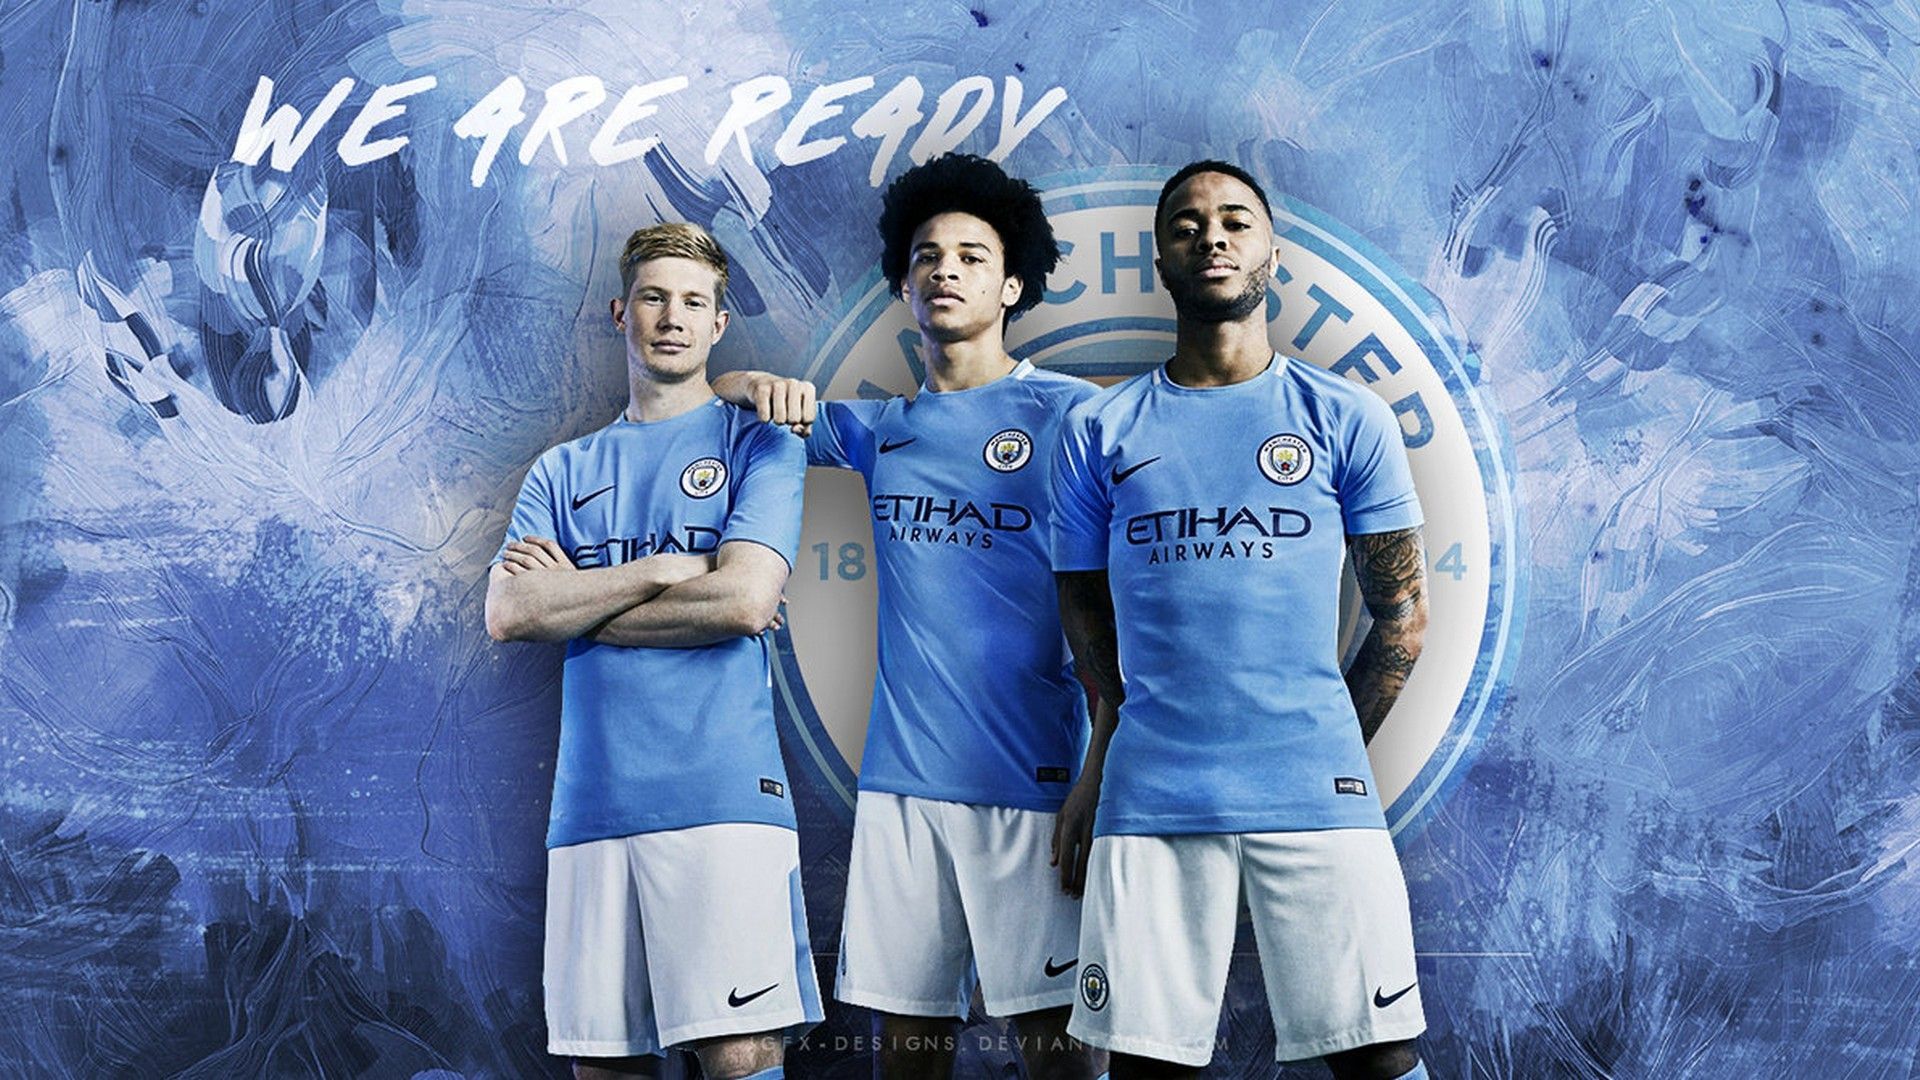 Manchester City Wallpaper For Mac Background. Best Football Wallpaper HD. Manchester city wallpaper, City wallpaper, Manchester city